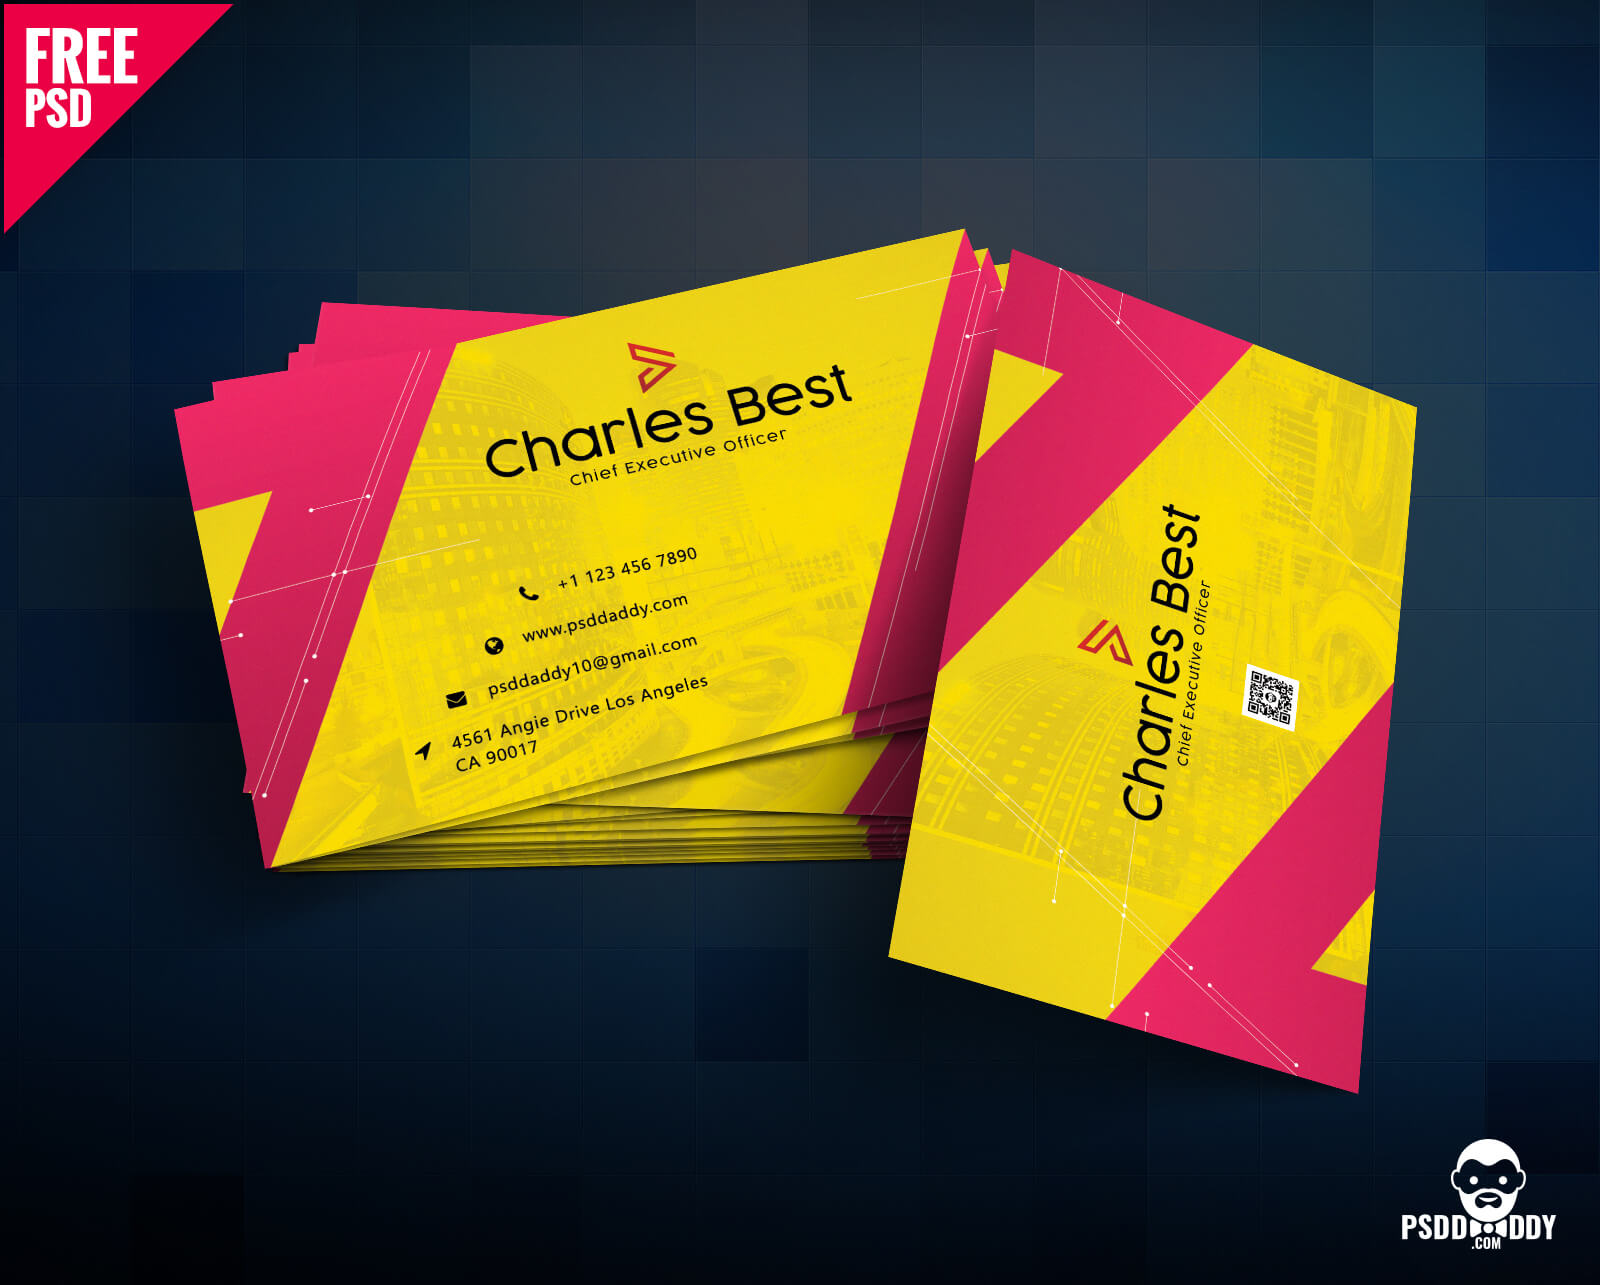 Download] Creative Business Card Free Psd | Psddaddy Intended For Photoshop Business Card Template With Bleed